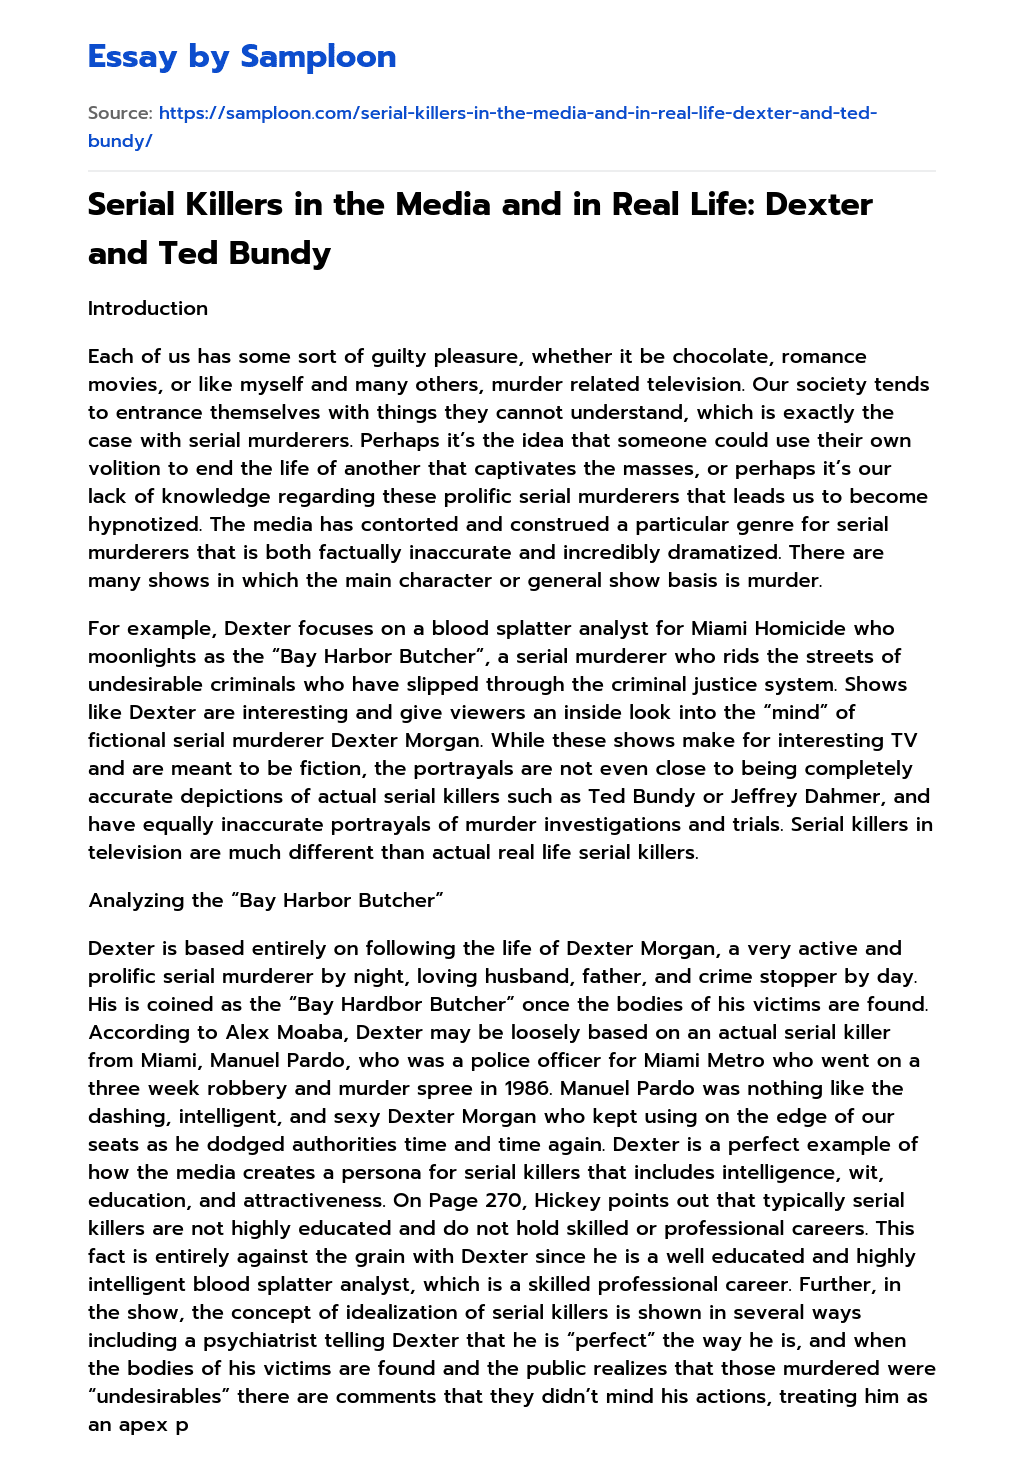 Serial Killers in the Media and in Real Life: Dexter and Ted Bundy essay